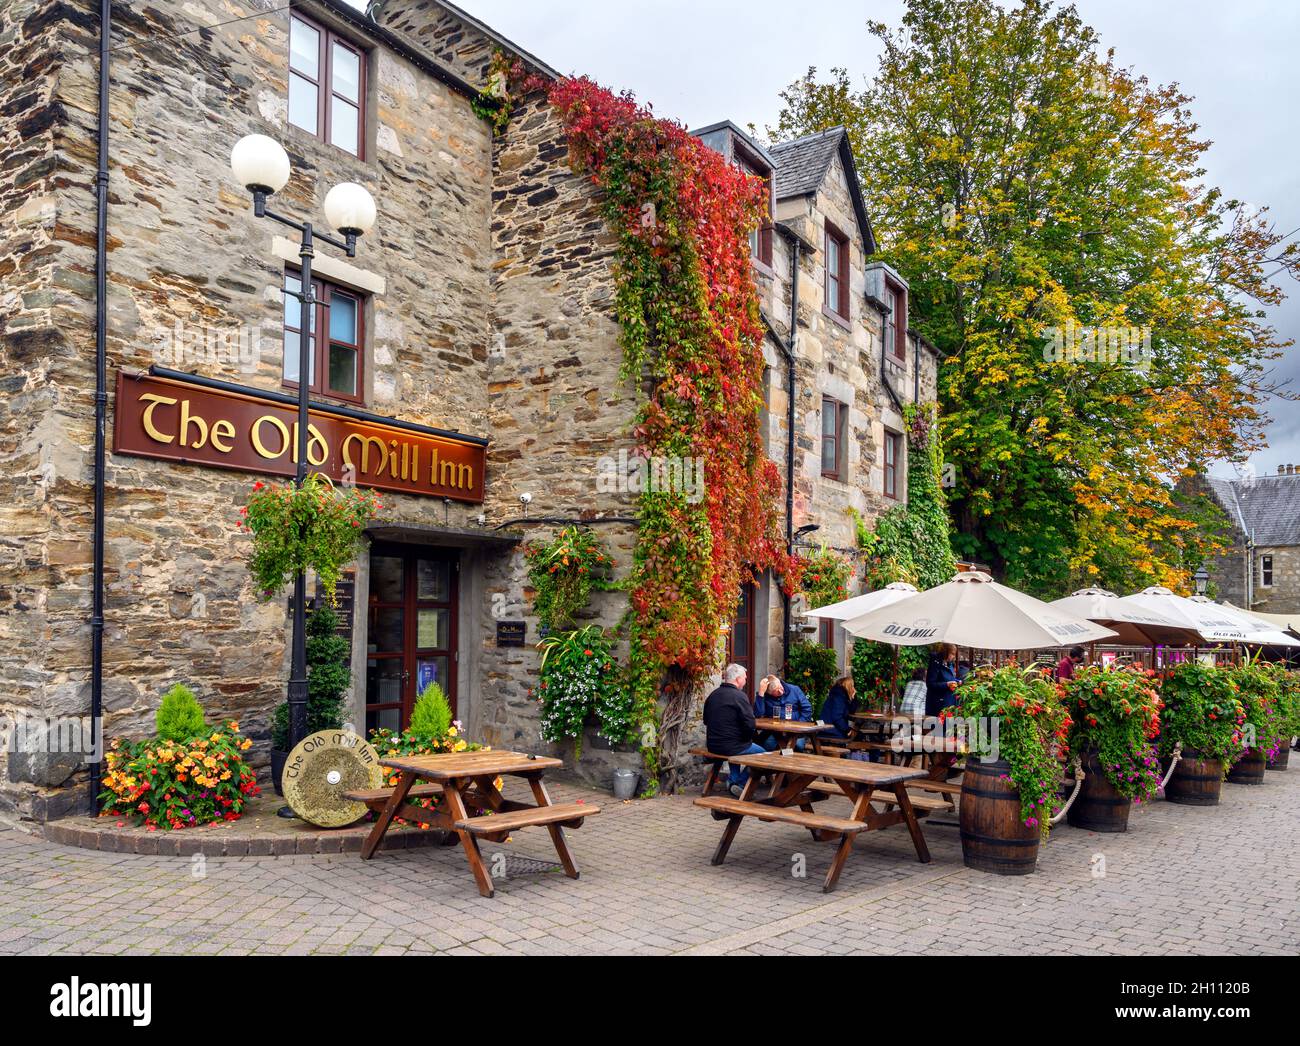 The Old Mill Inn, Pitlochry, Scotland, UK Stock Photo